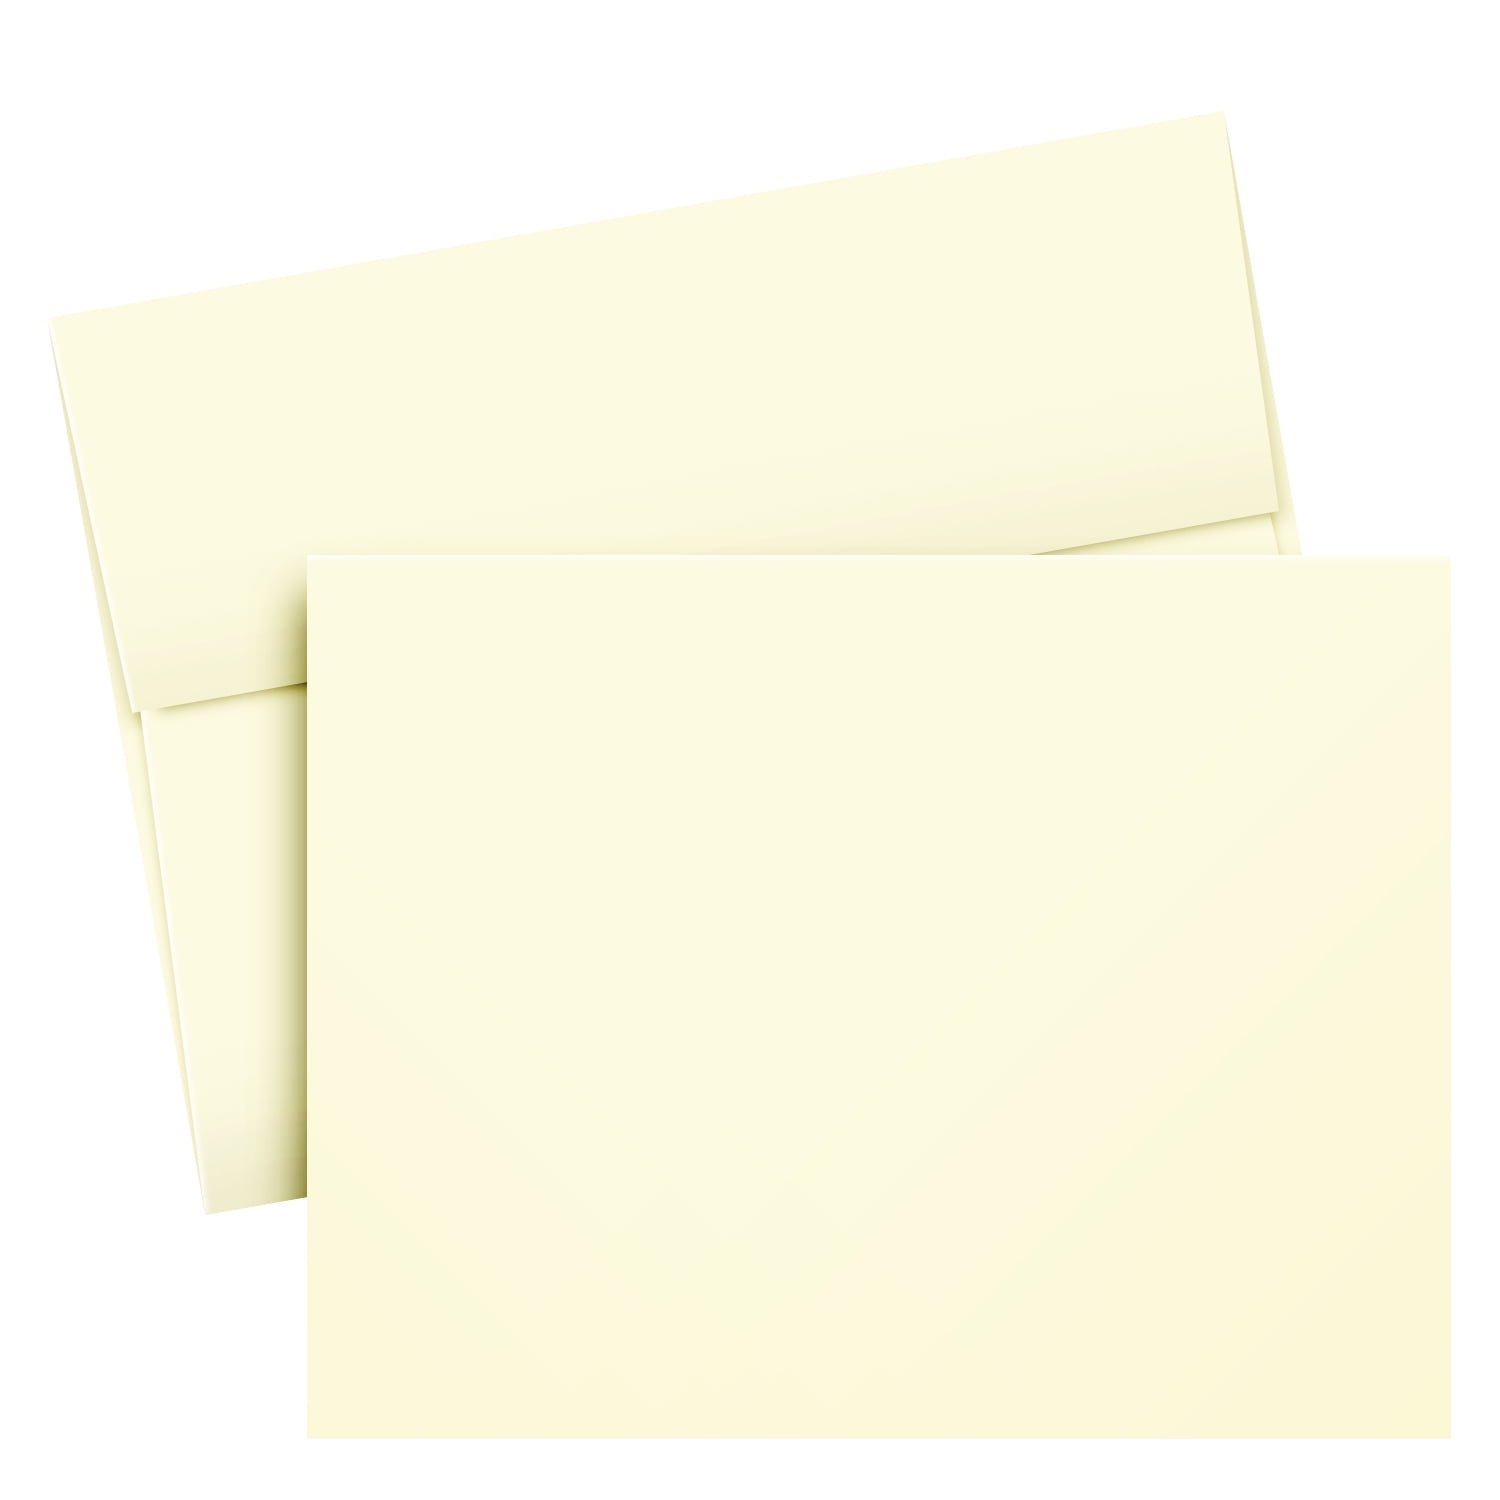 Desktop Publishing Supplies, Inc. Heavyweight Blank White 5x7 Flat  Cardstock and Envelopes - 5 x 7 Invitations Size - 100 Cards & Envelopes  Pack 